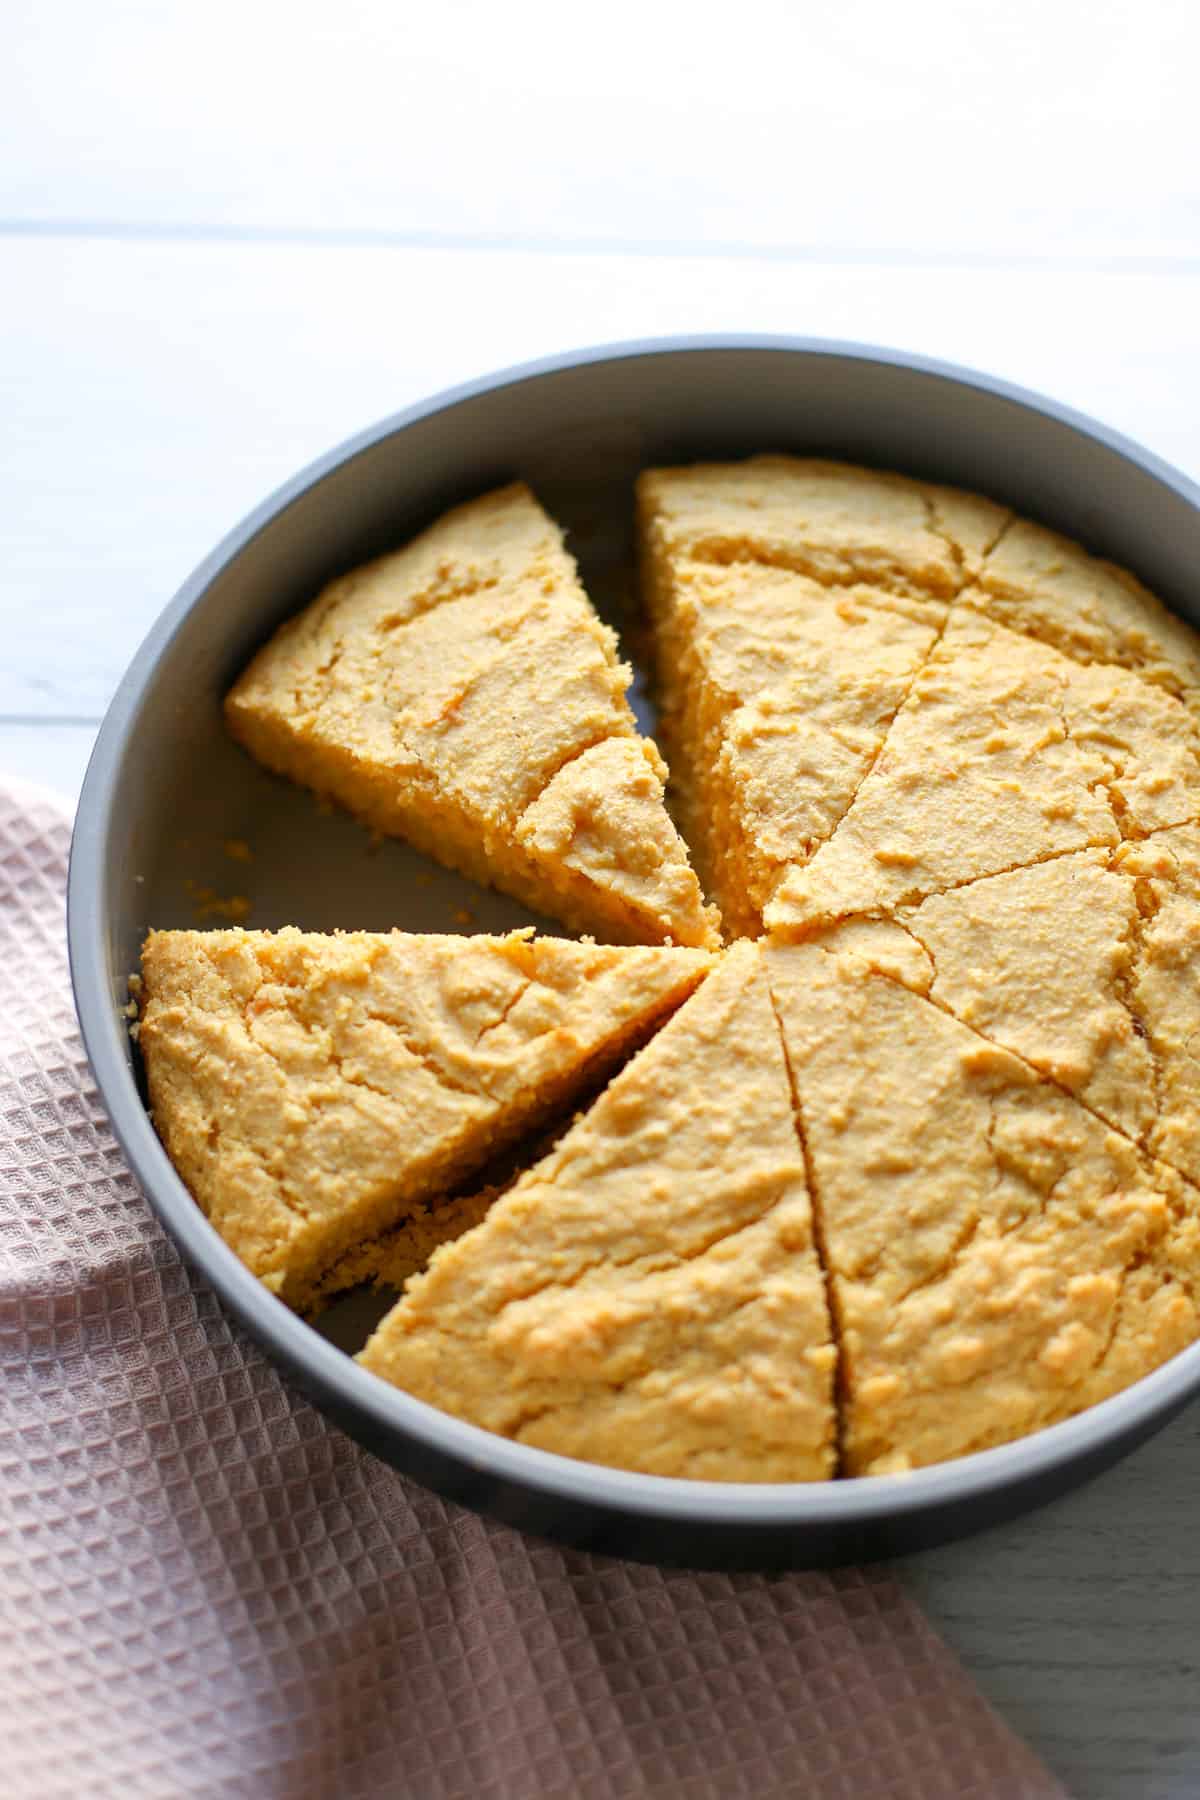 Baked sweet potato corn bread in a round metal pan with slices cut and one missing.